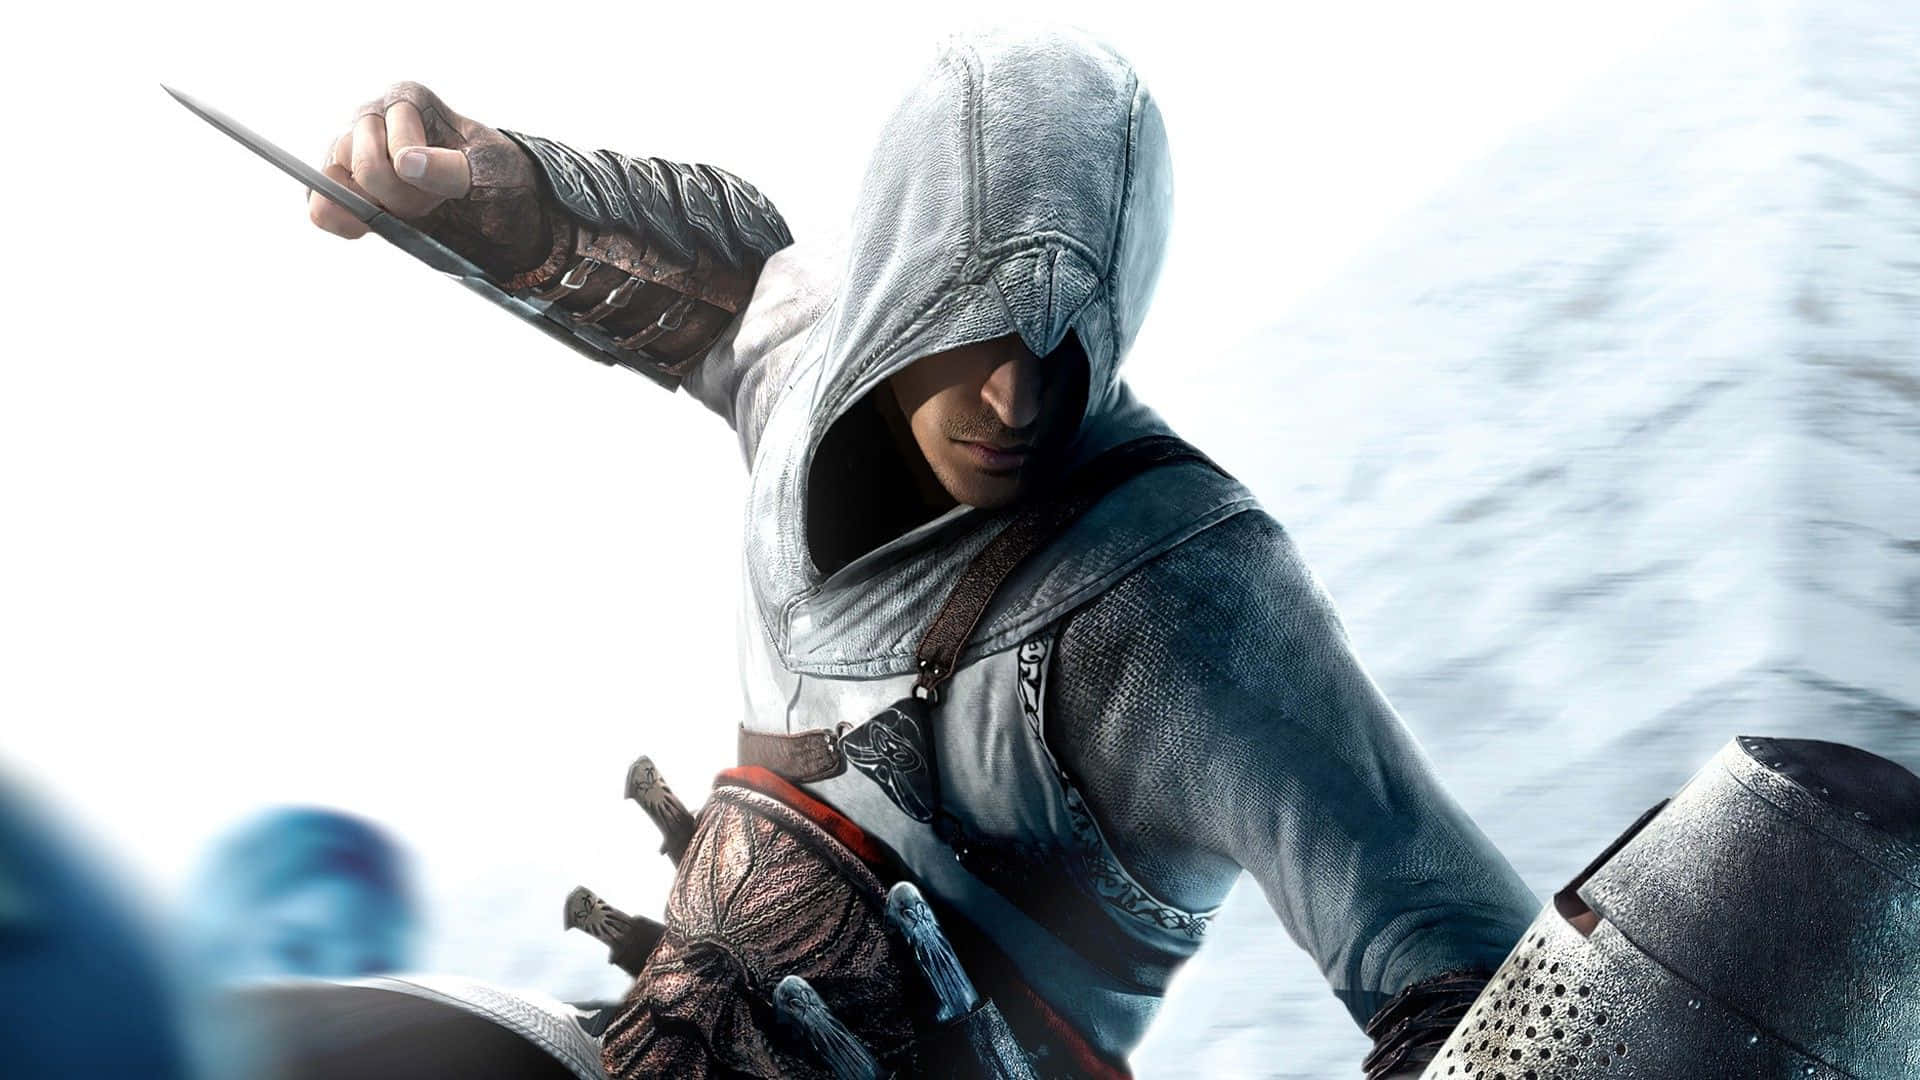 Assassin's Creed Altair in Action Wallpaper